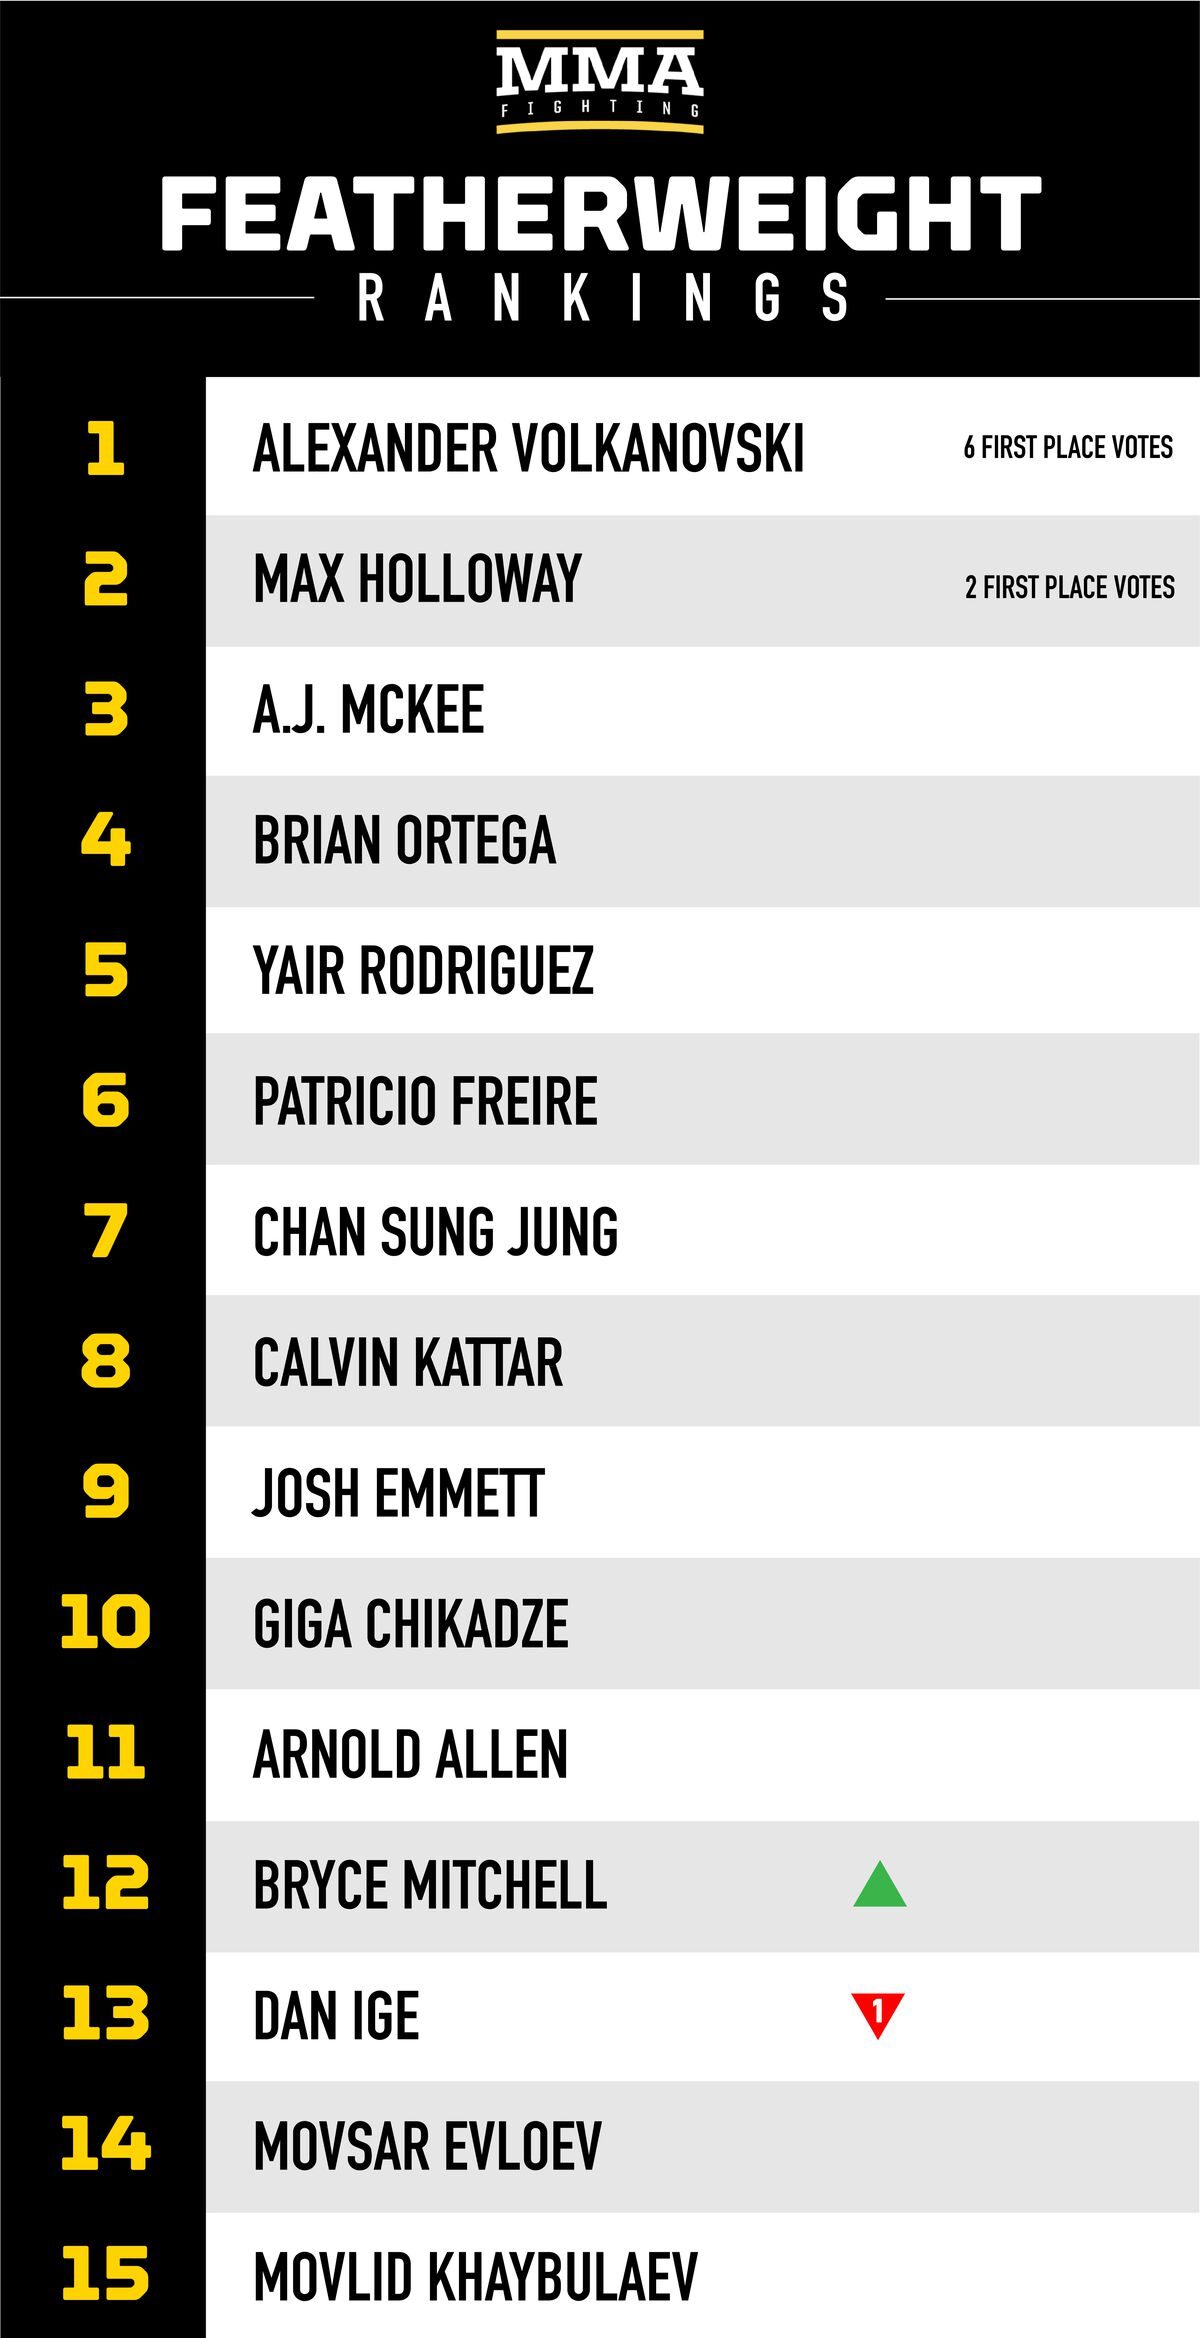 mmaf_rankings_april__featherweight